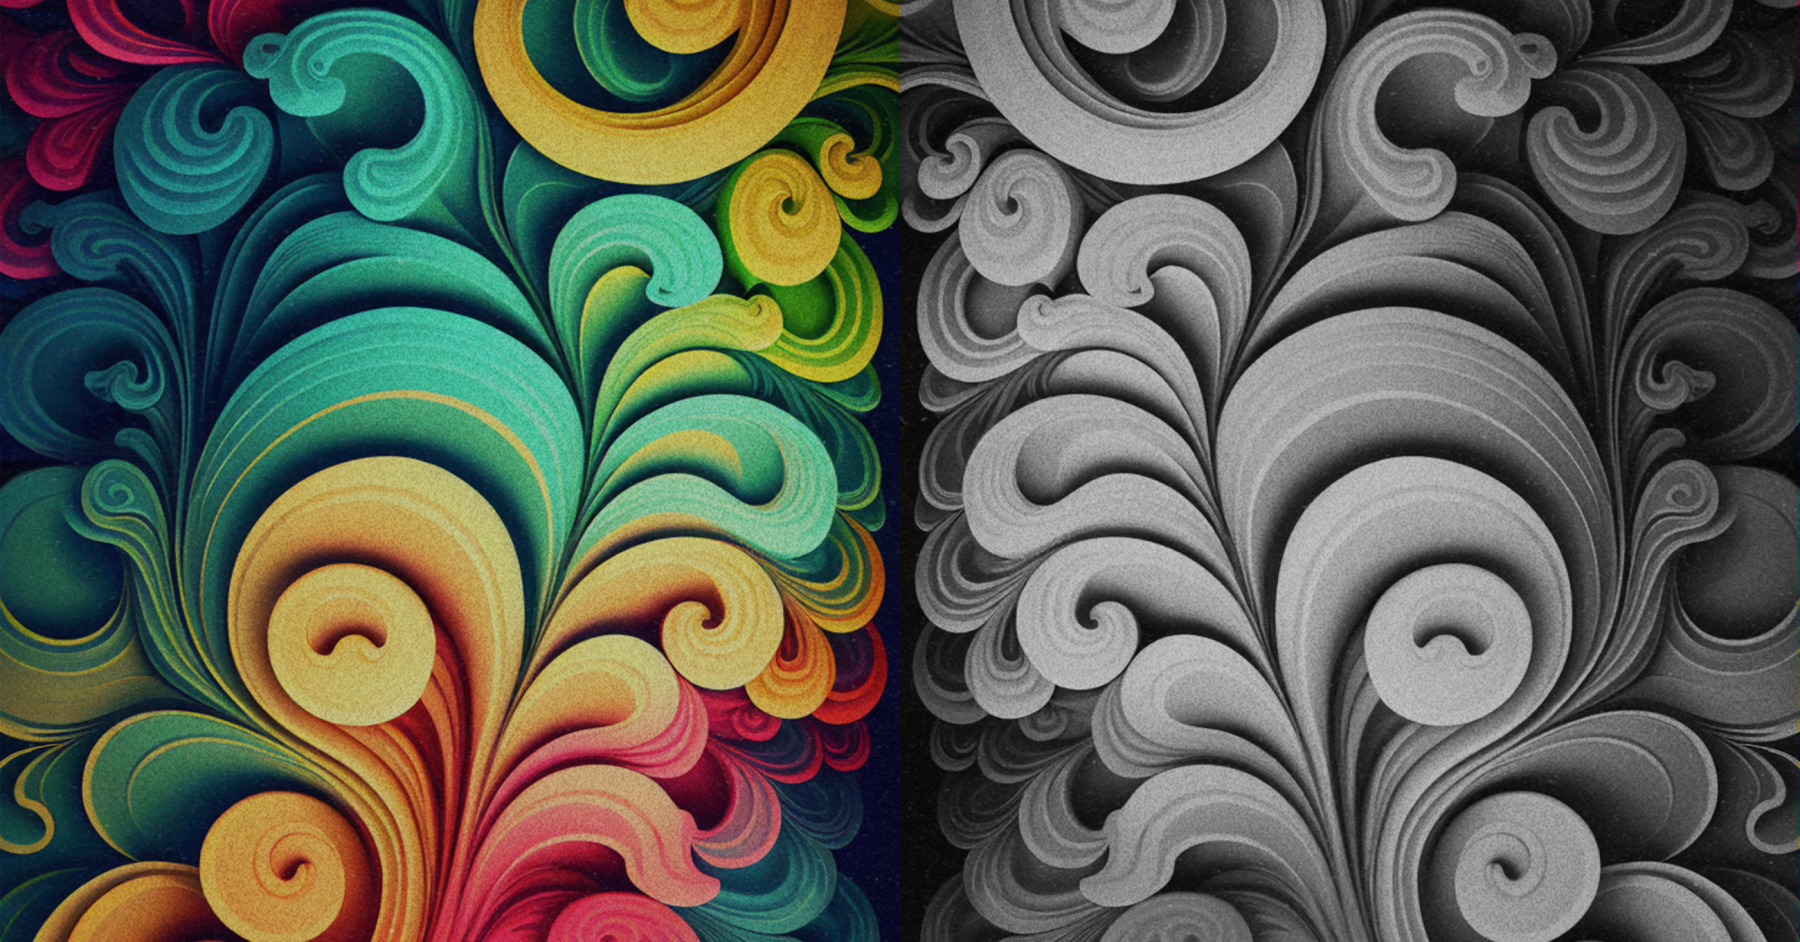 A patterned background, half in vibrant colors and half in grey scale, split down the middle.